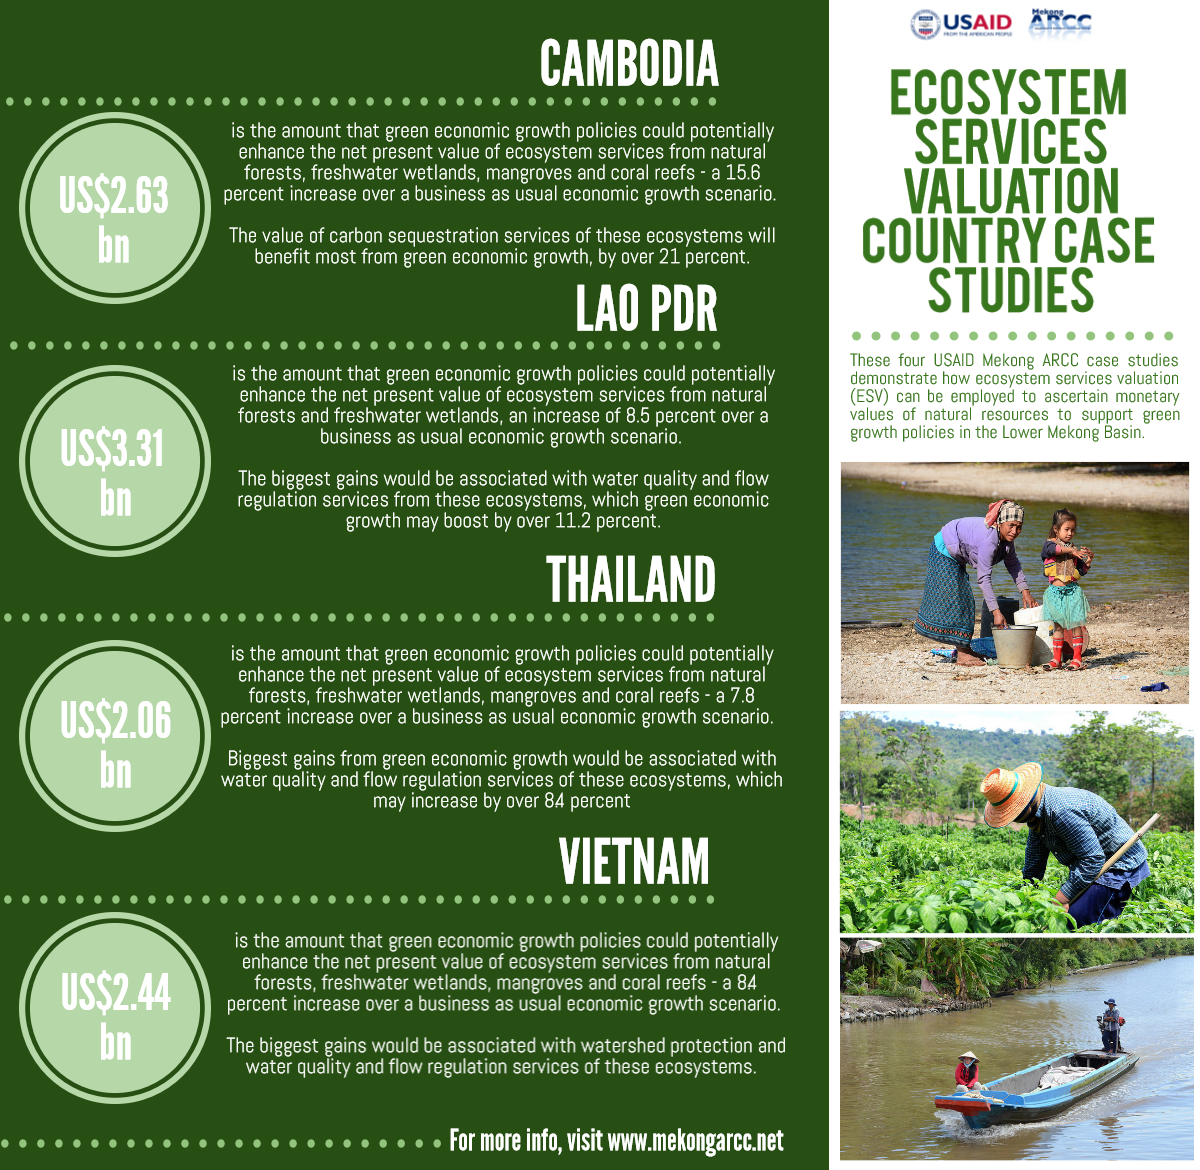 Ecosystem Services Valuation Country Case Studies